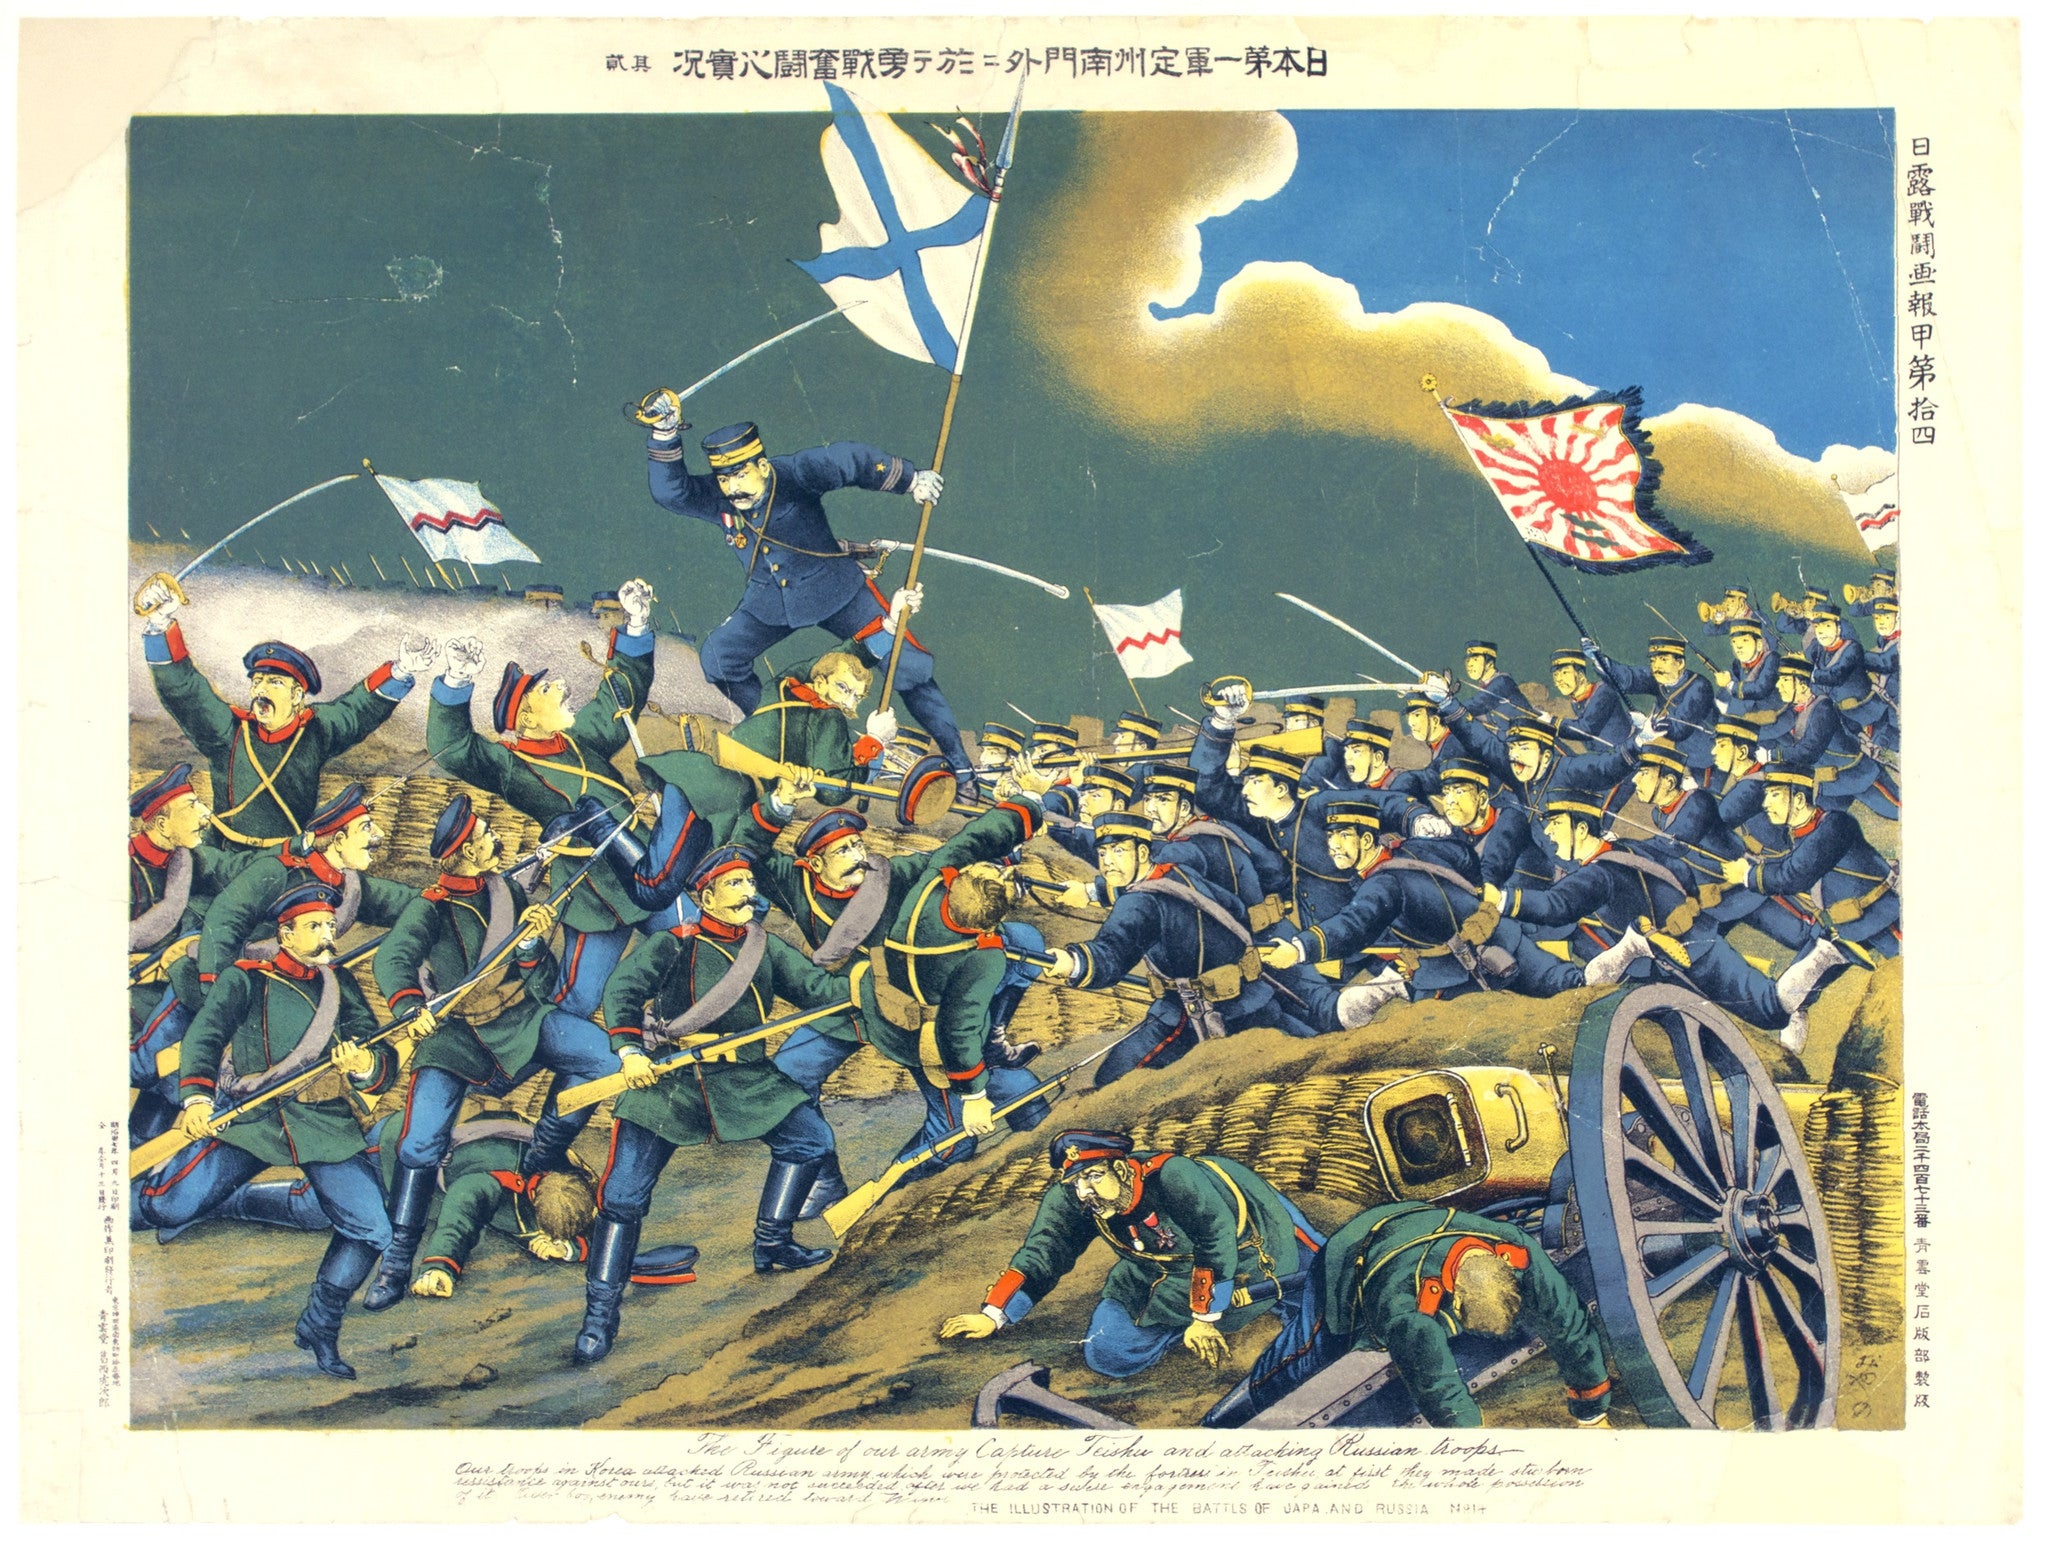 Russian and Japanese Troops at War